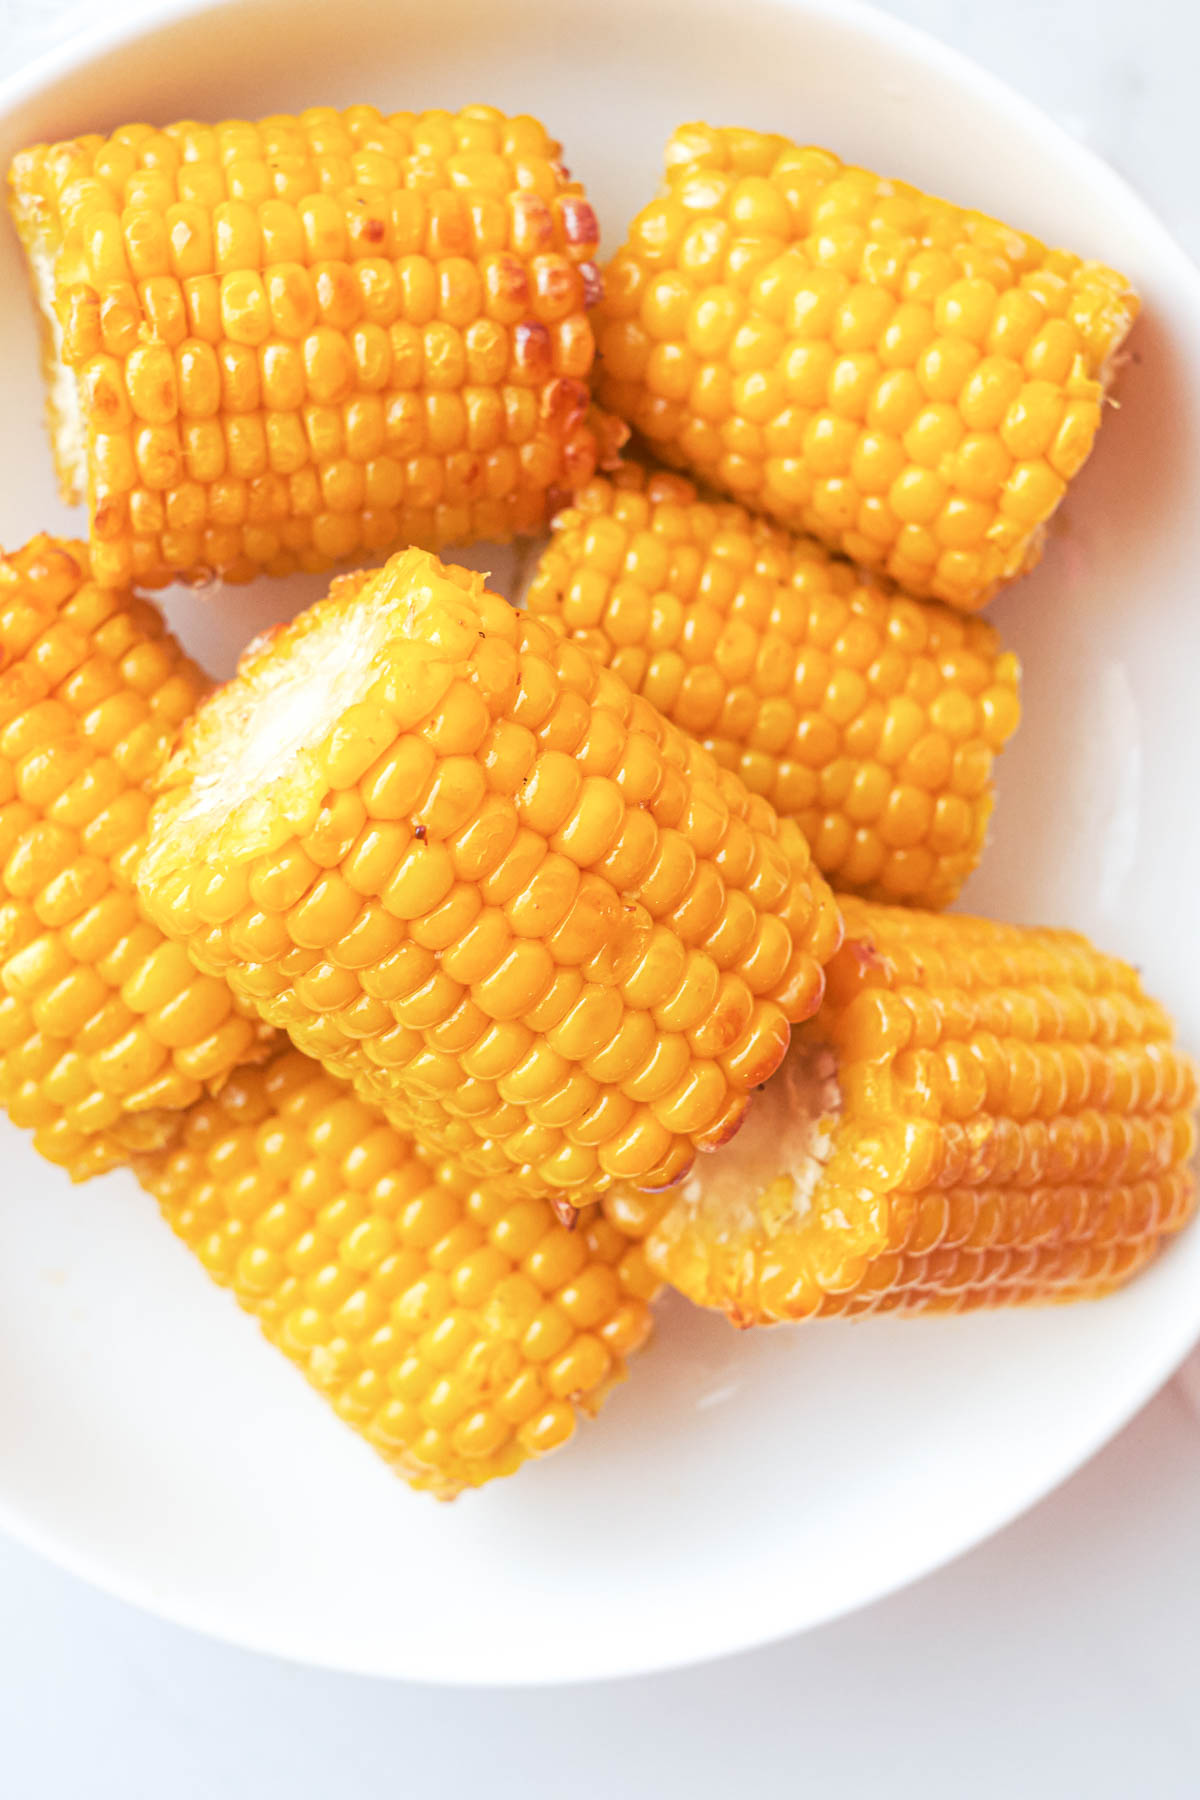 top down view of a plate filled with cooked frozen corn on the cob